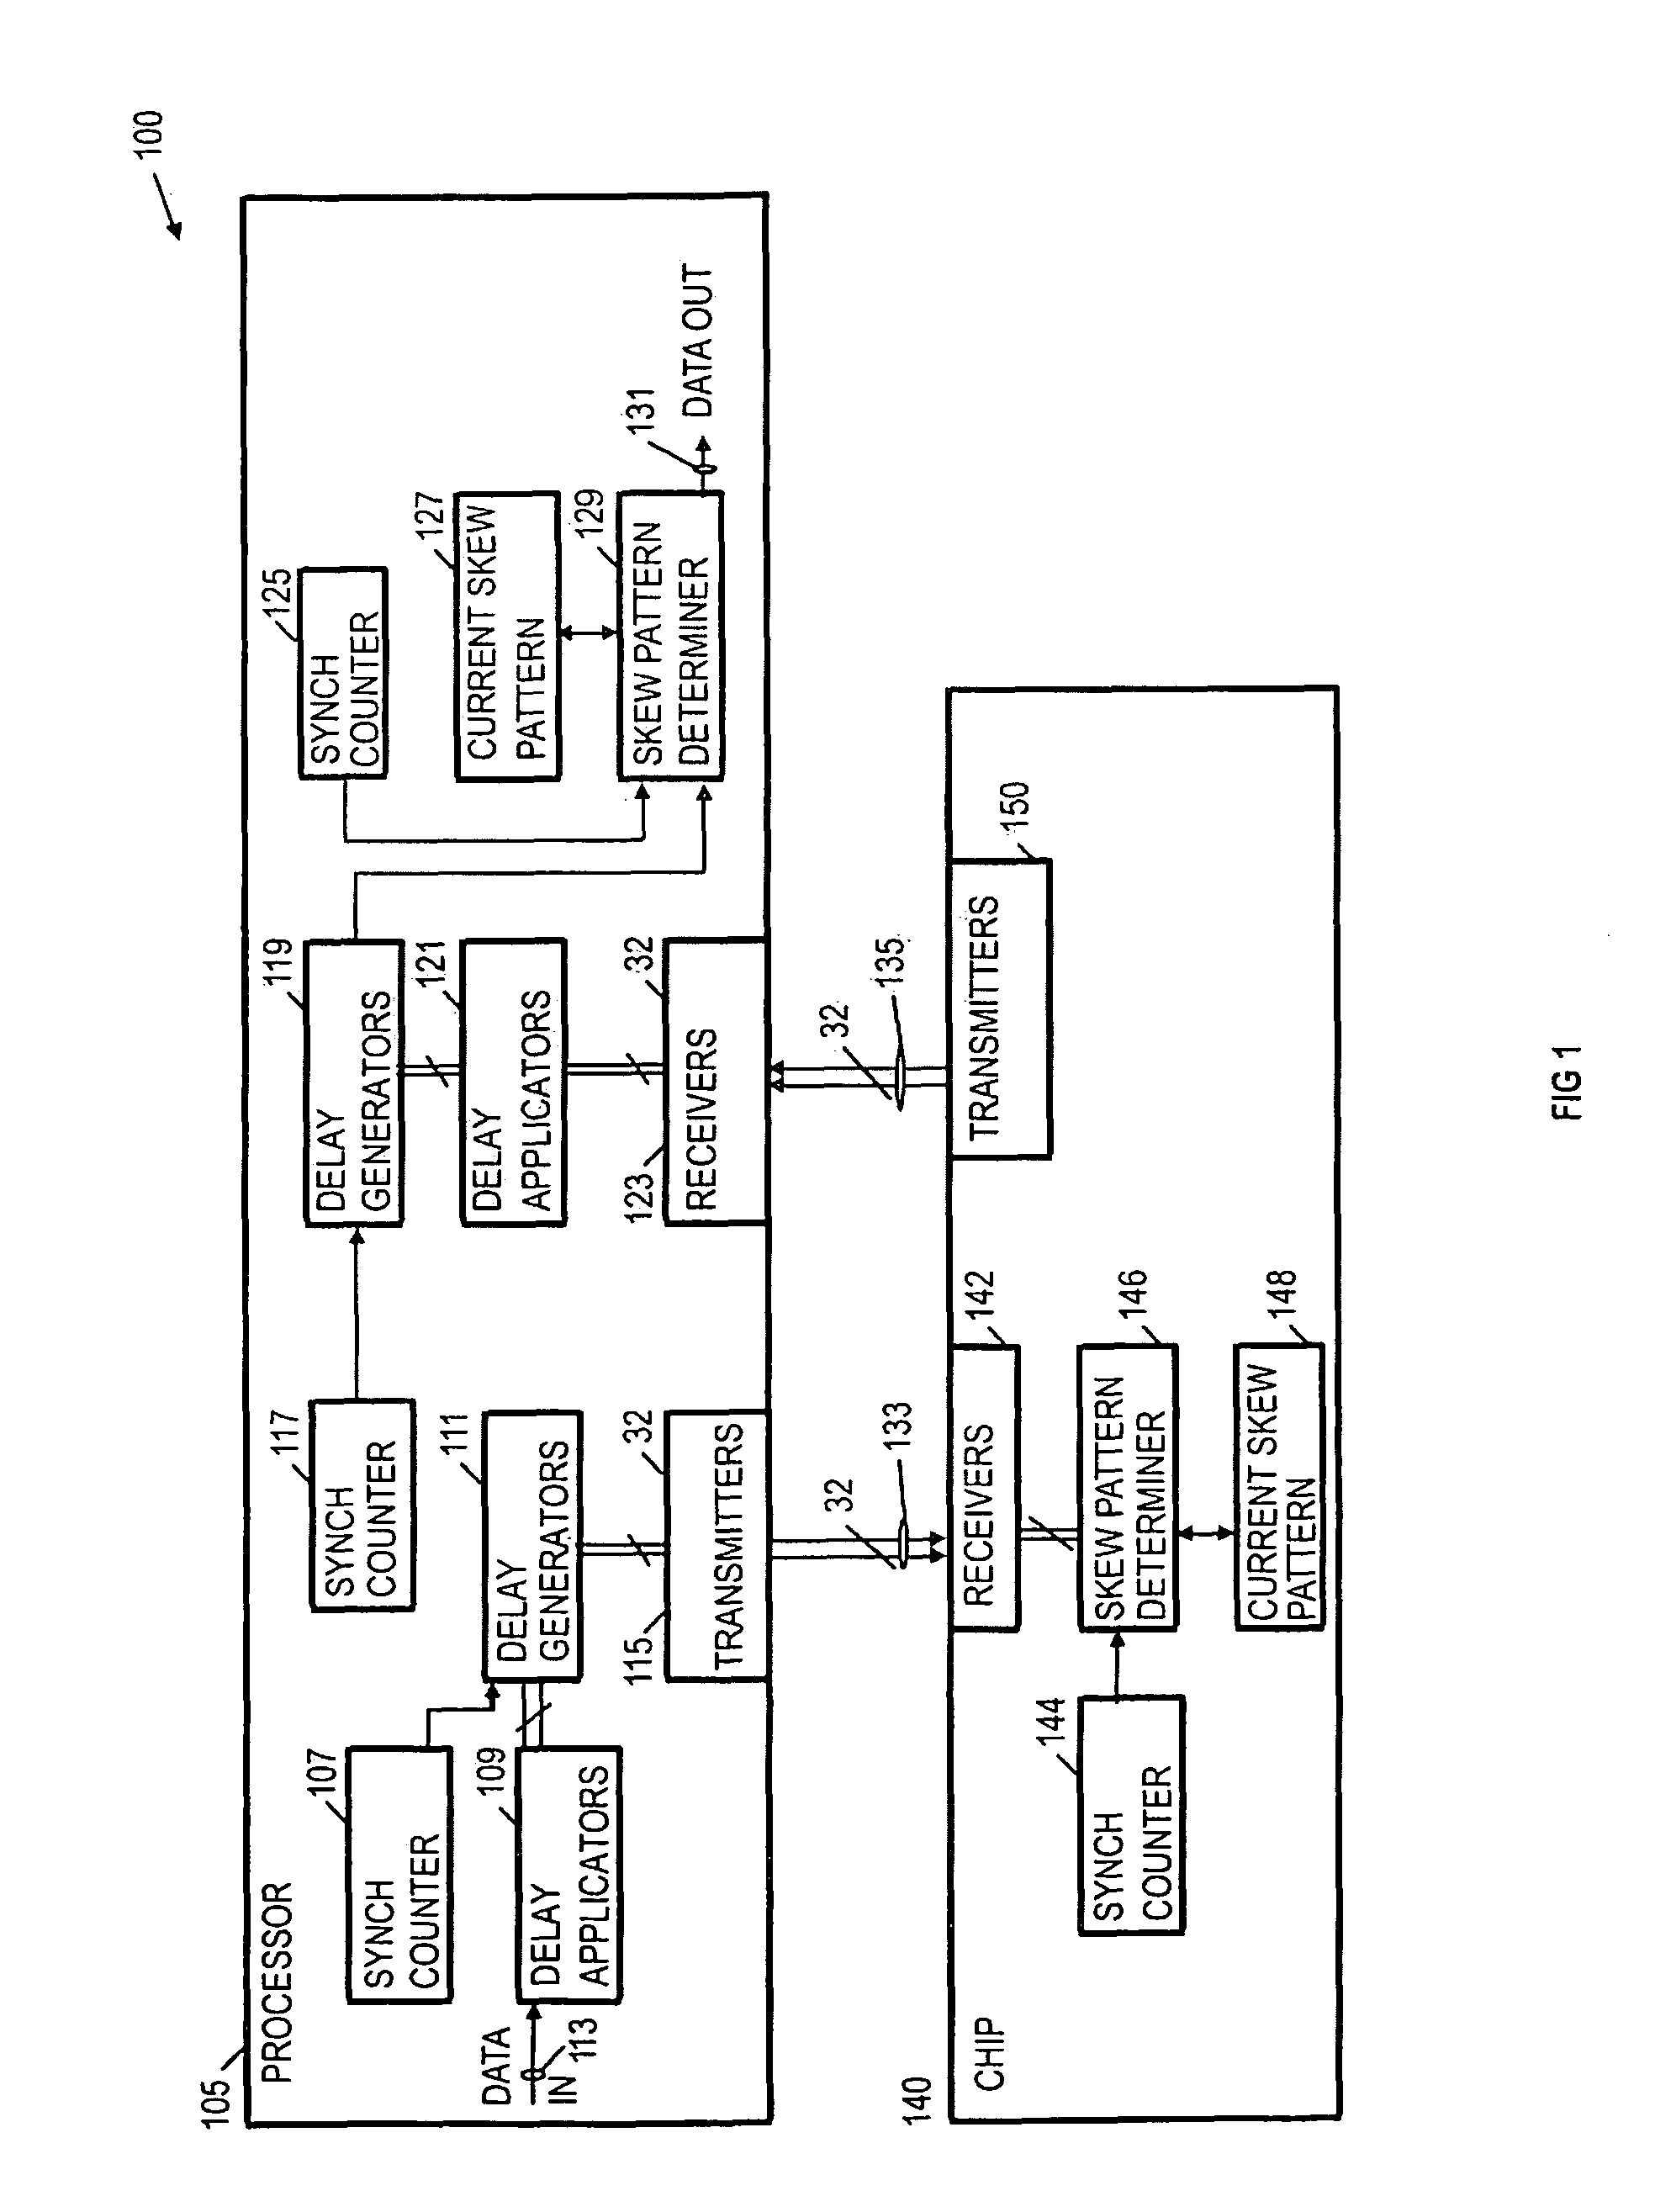 Methods and arrangements to model an asynchronous interface